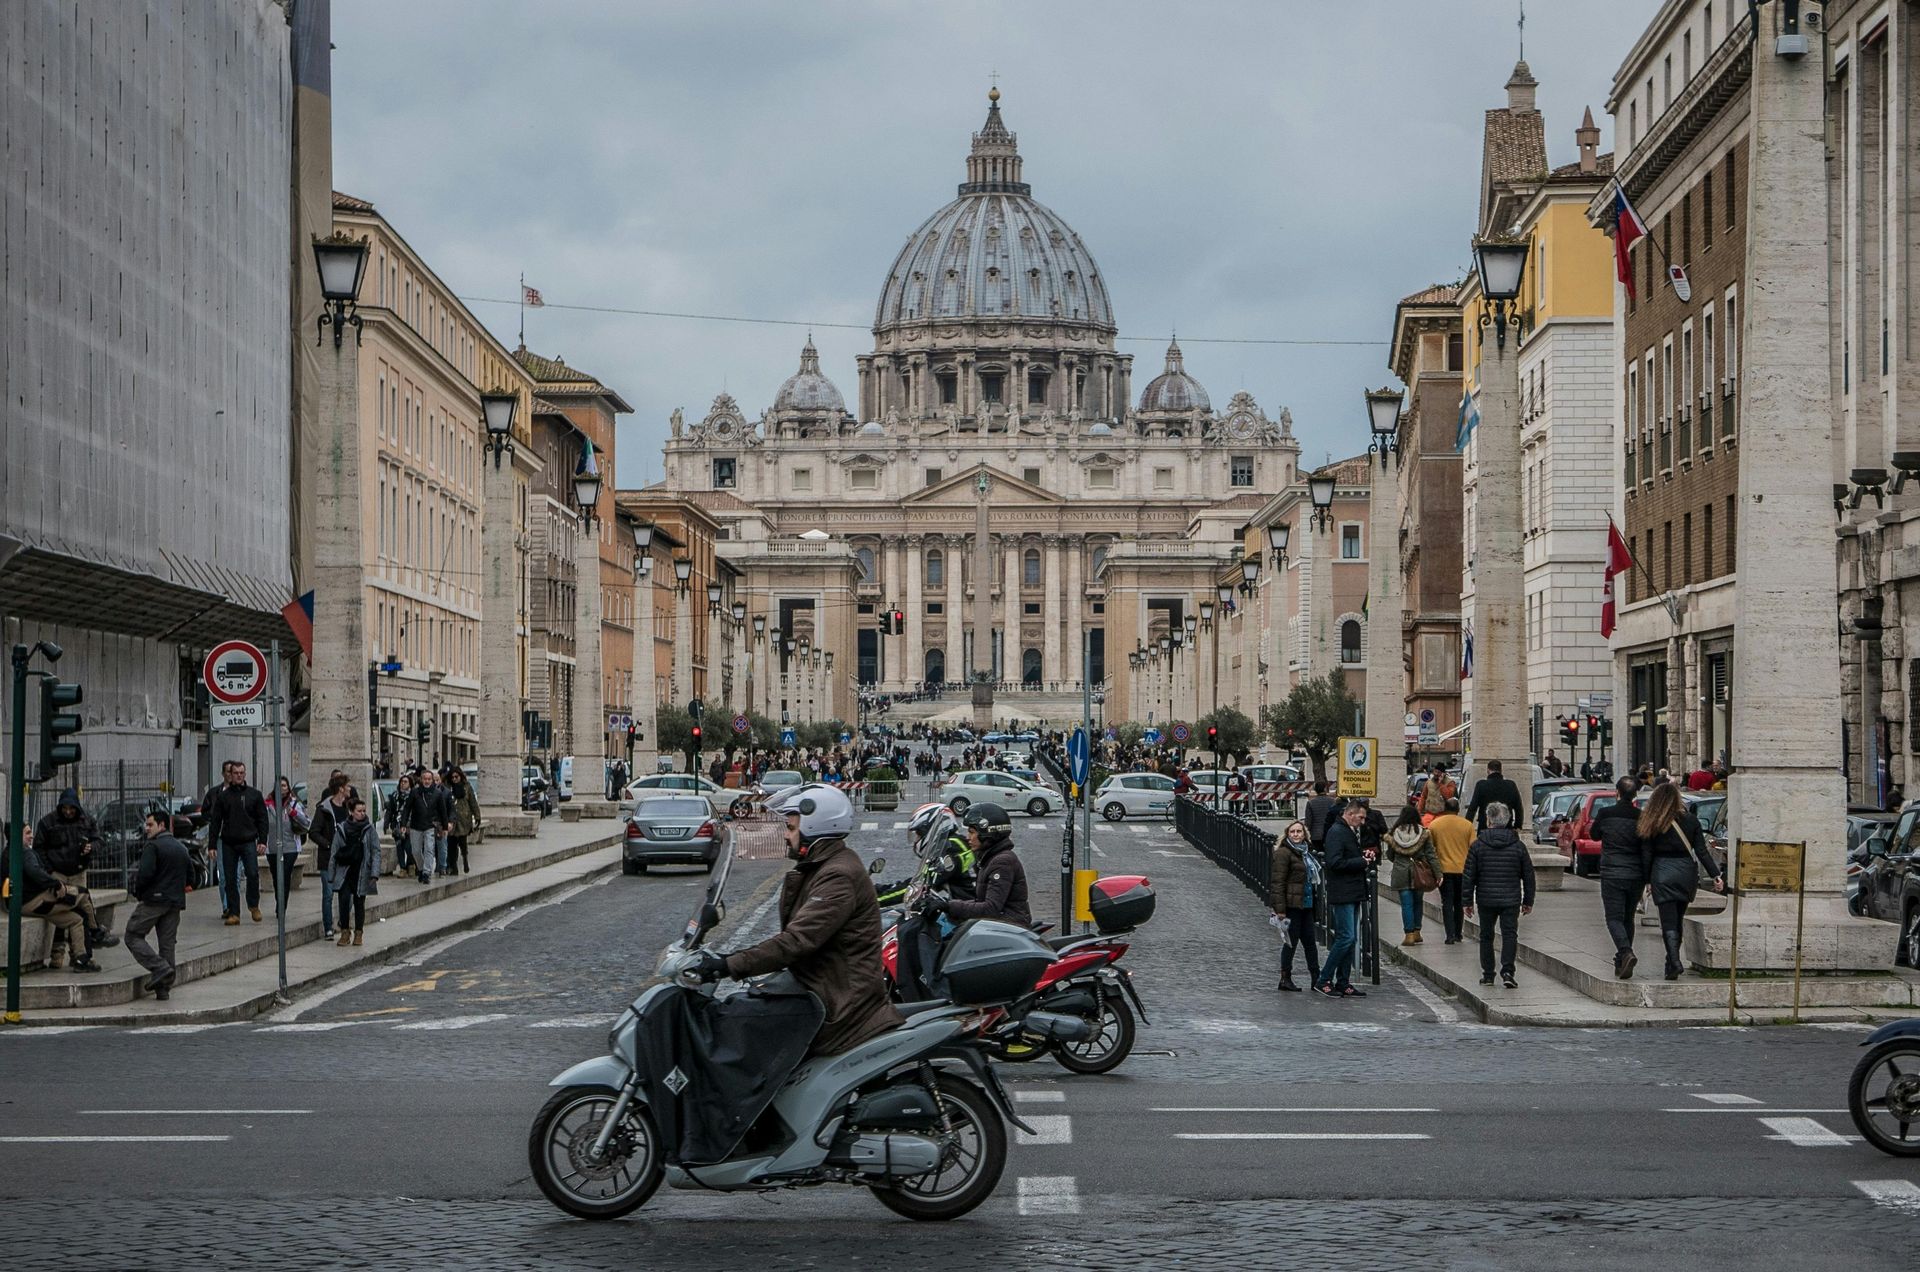 How to get to Sistine Chapel from St Peter Basilica